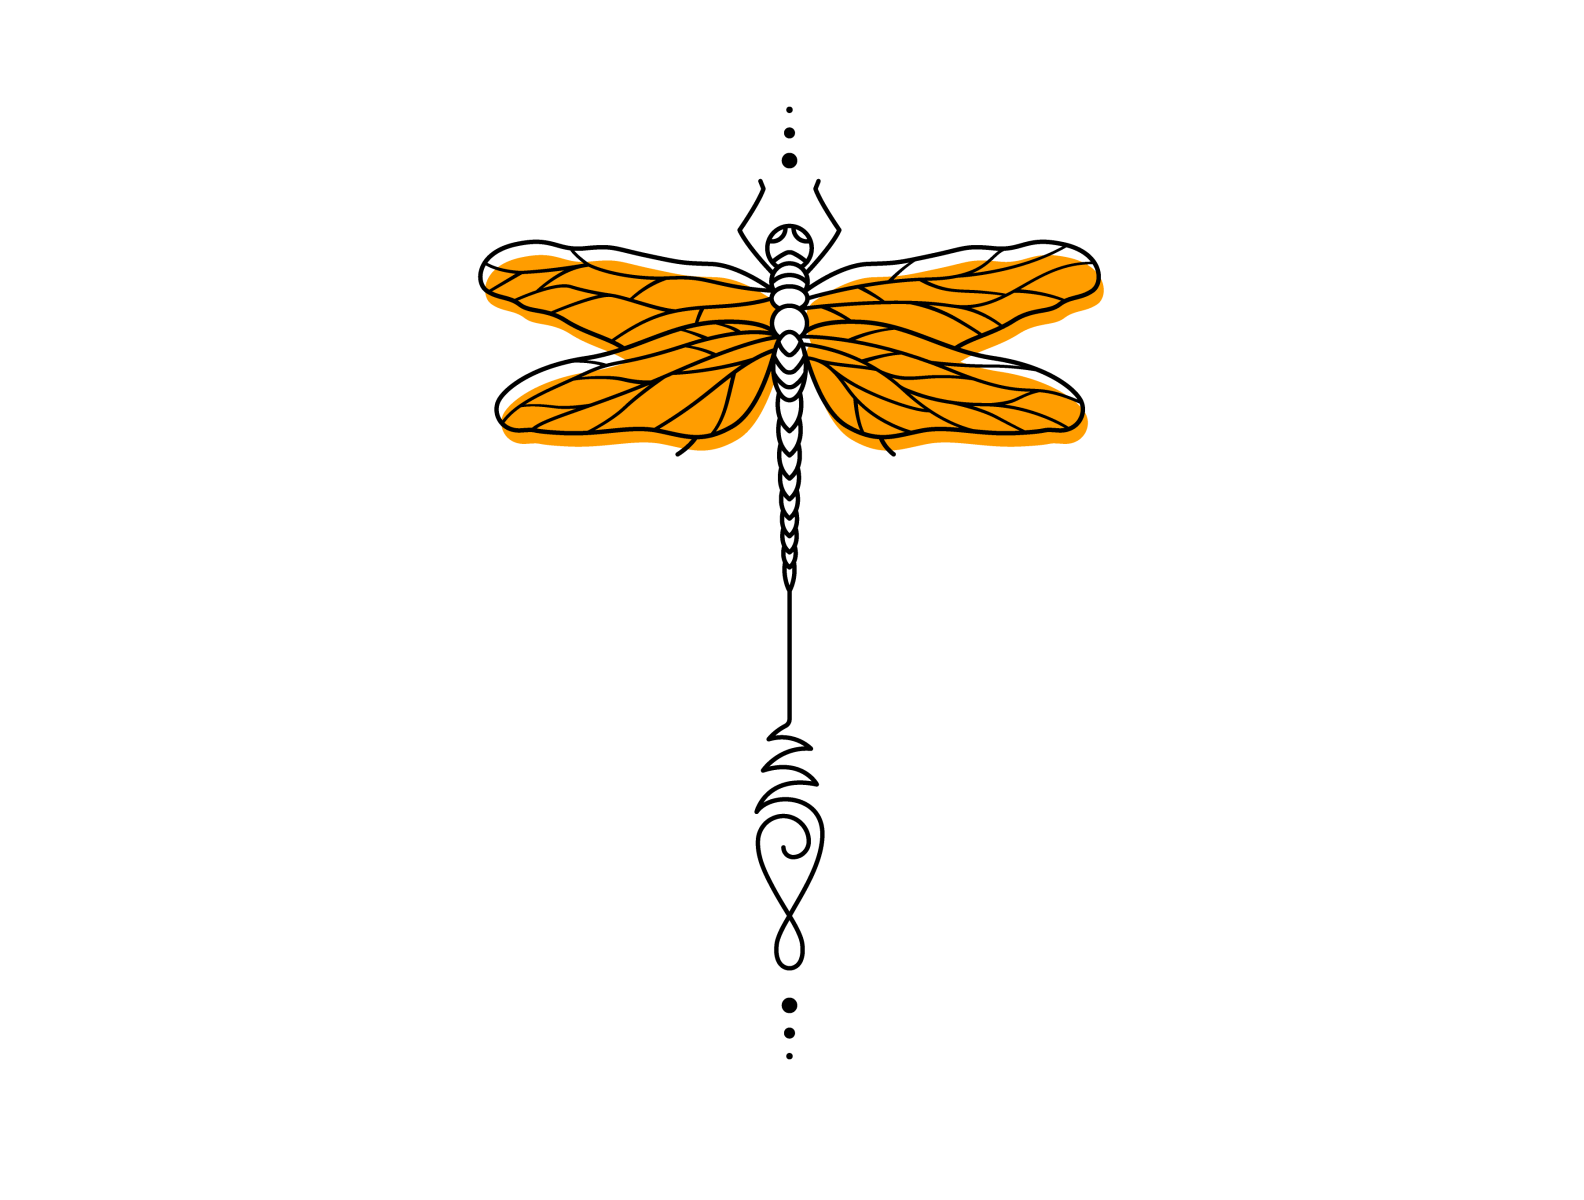 Dragonfly tattoo design by qube Graphics on Dribbble